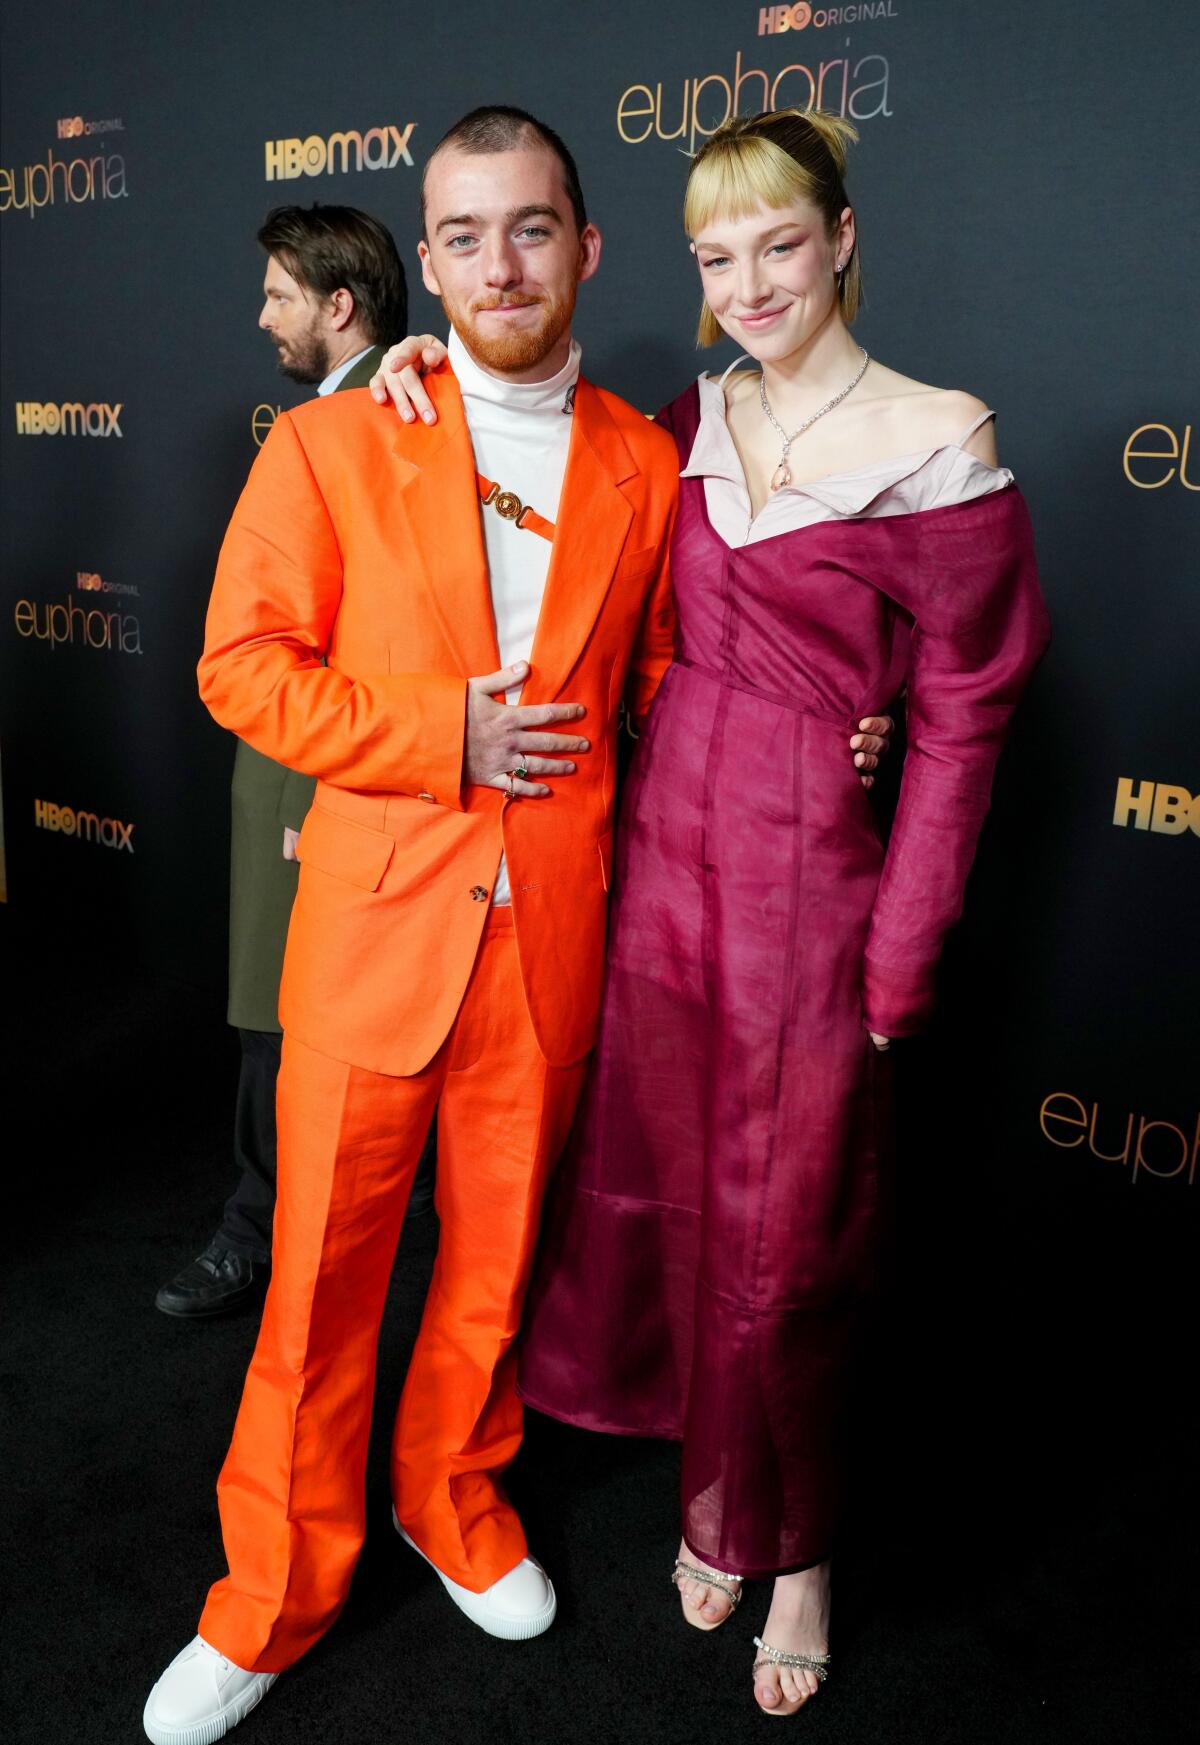 Angus Cloud poses in an orange suit next to Hunter Schafer, who has her arm thrown over his shoulder